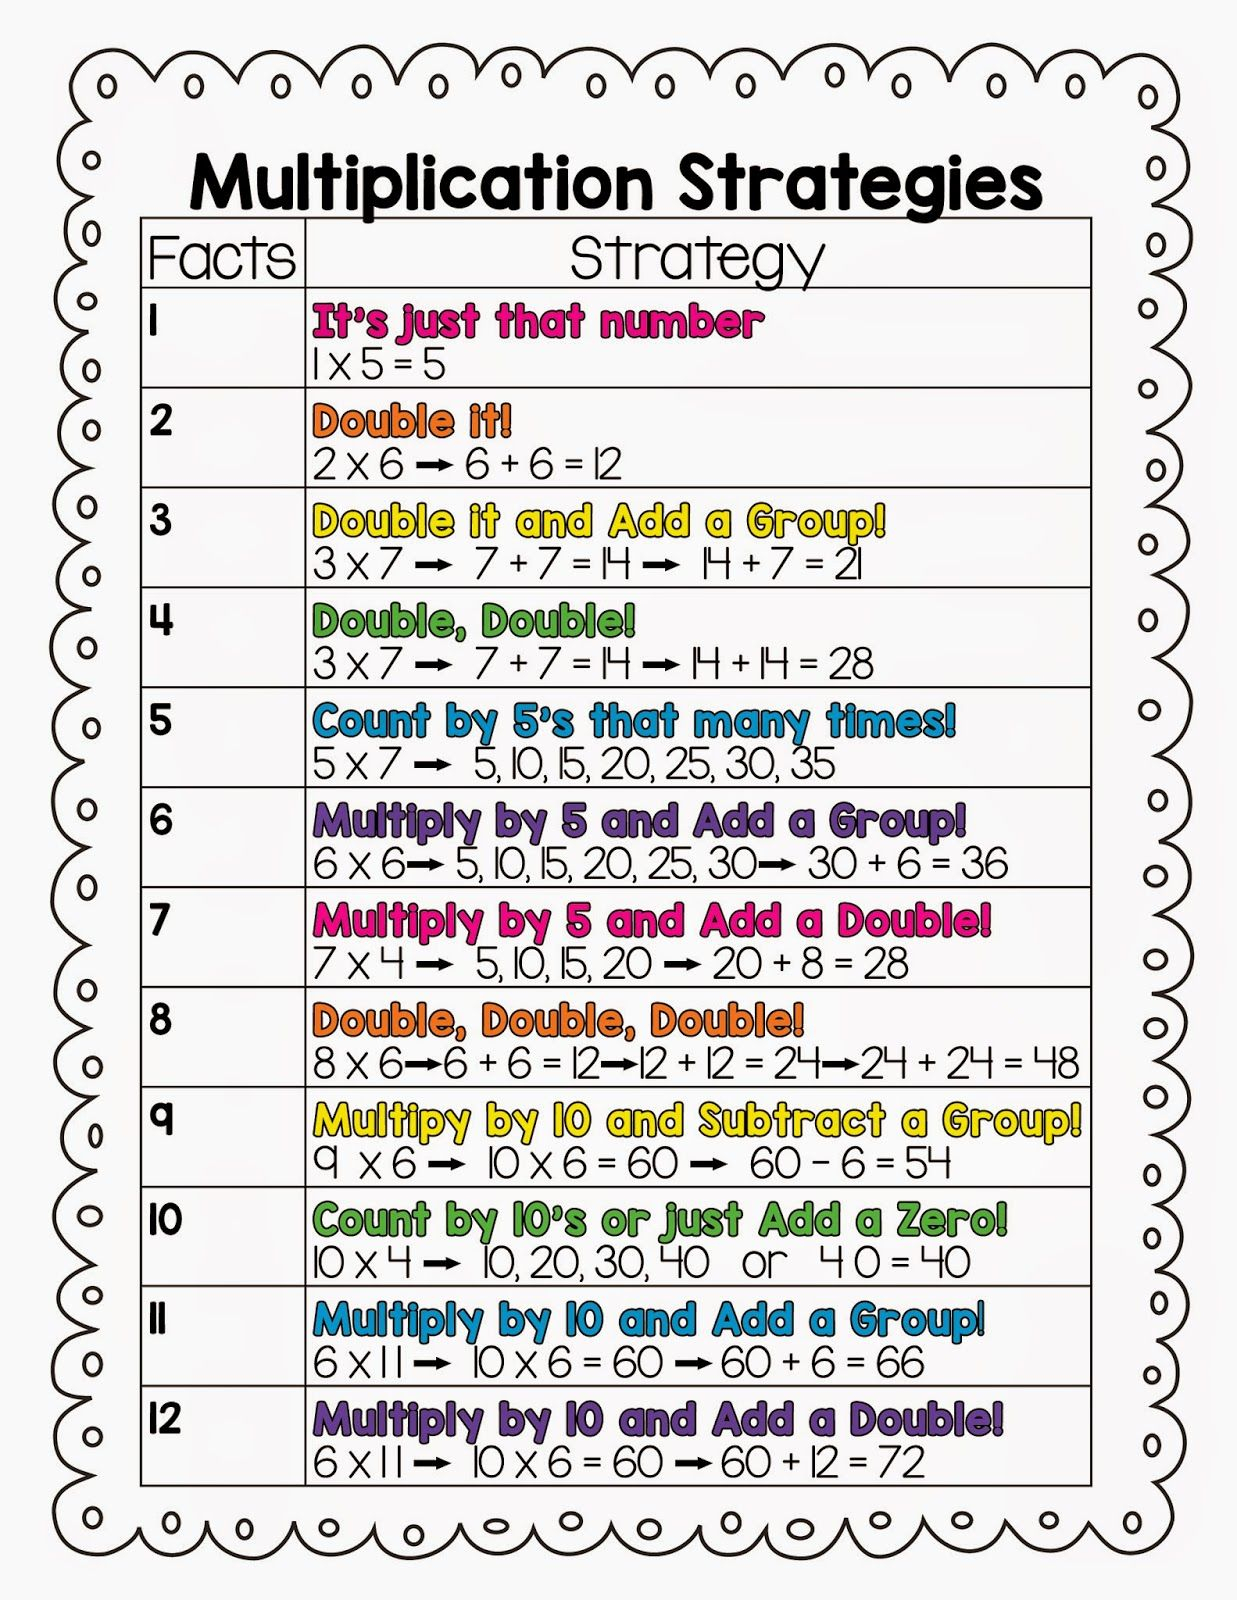 10 Multiplication Math Center Games &amp; Activities within Printable Multiplication Strategies